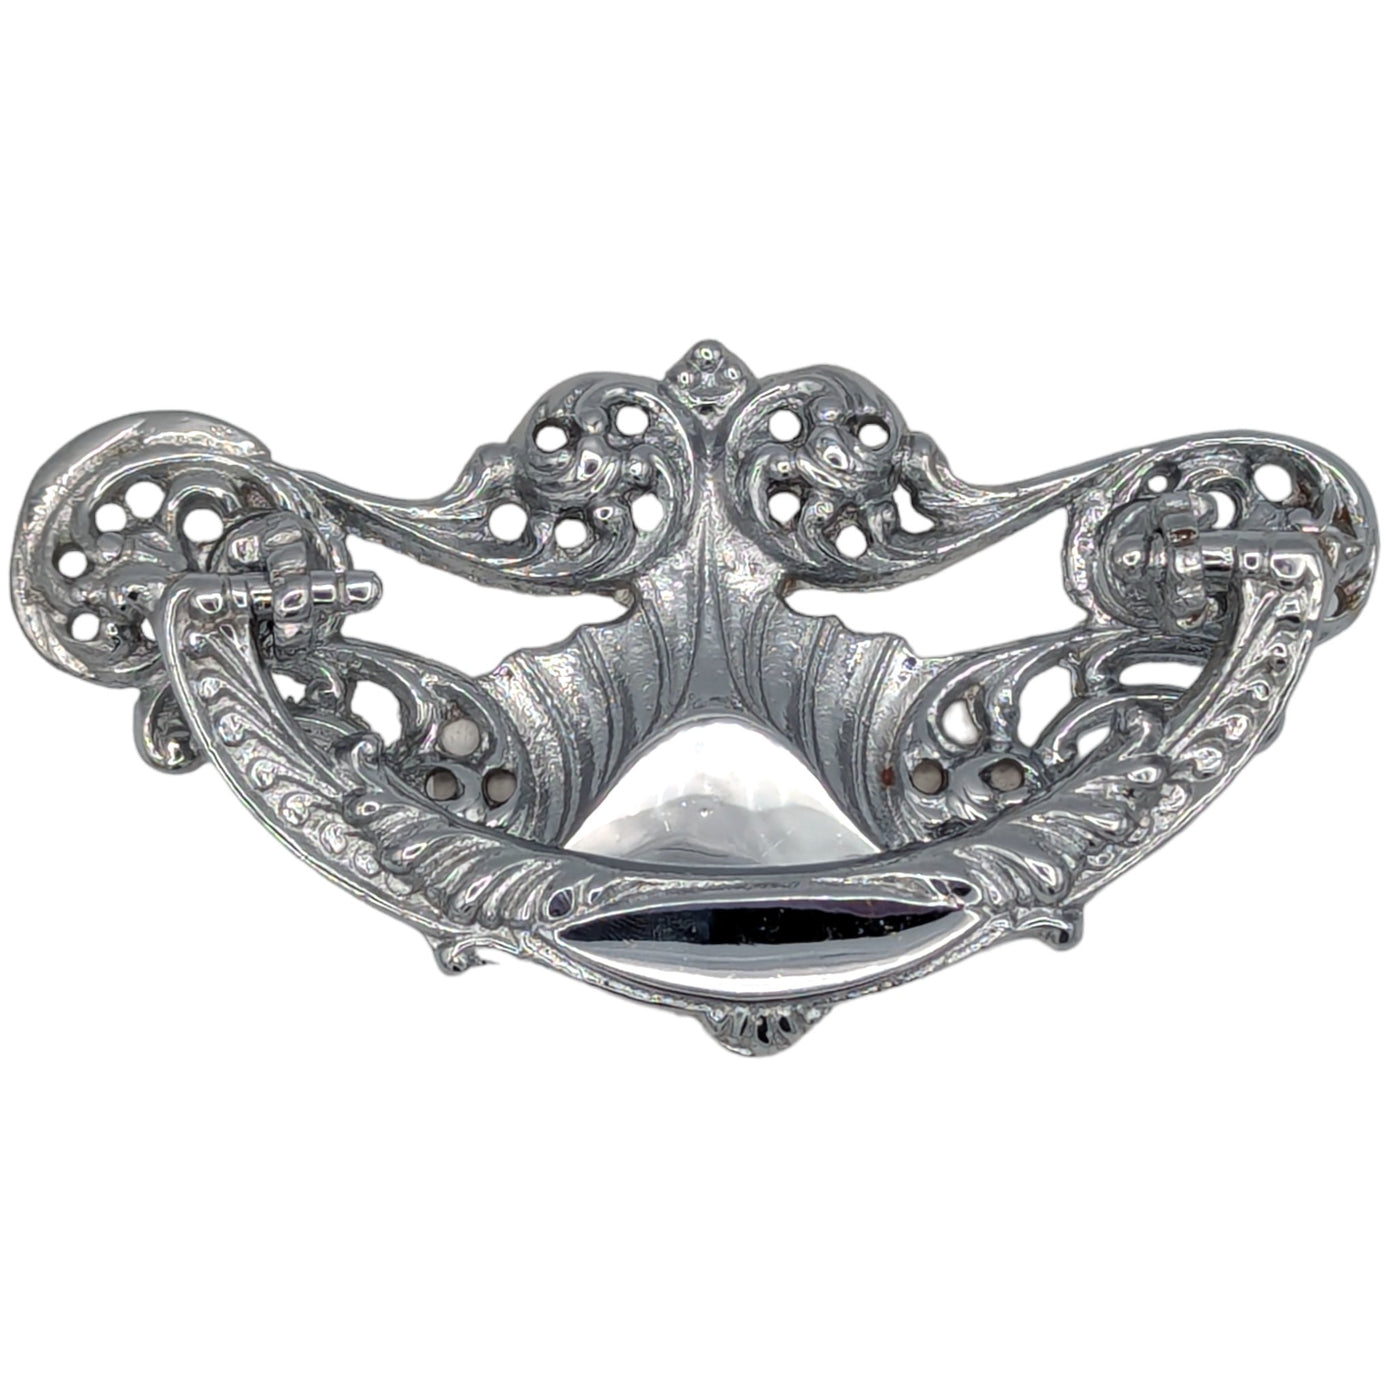 4 1/2 Inch Solid Brass Ornate Victorian Bail Pull (Polished Chrome Finish)